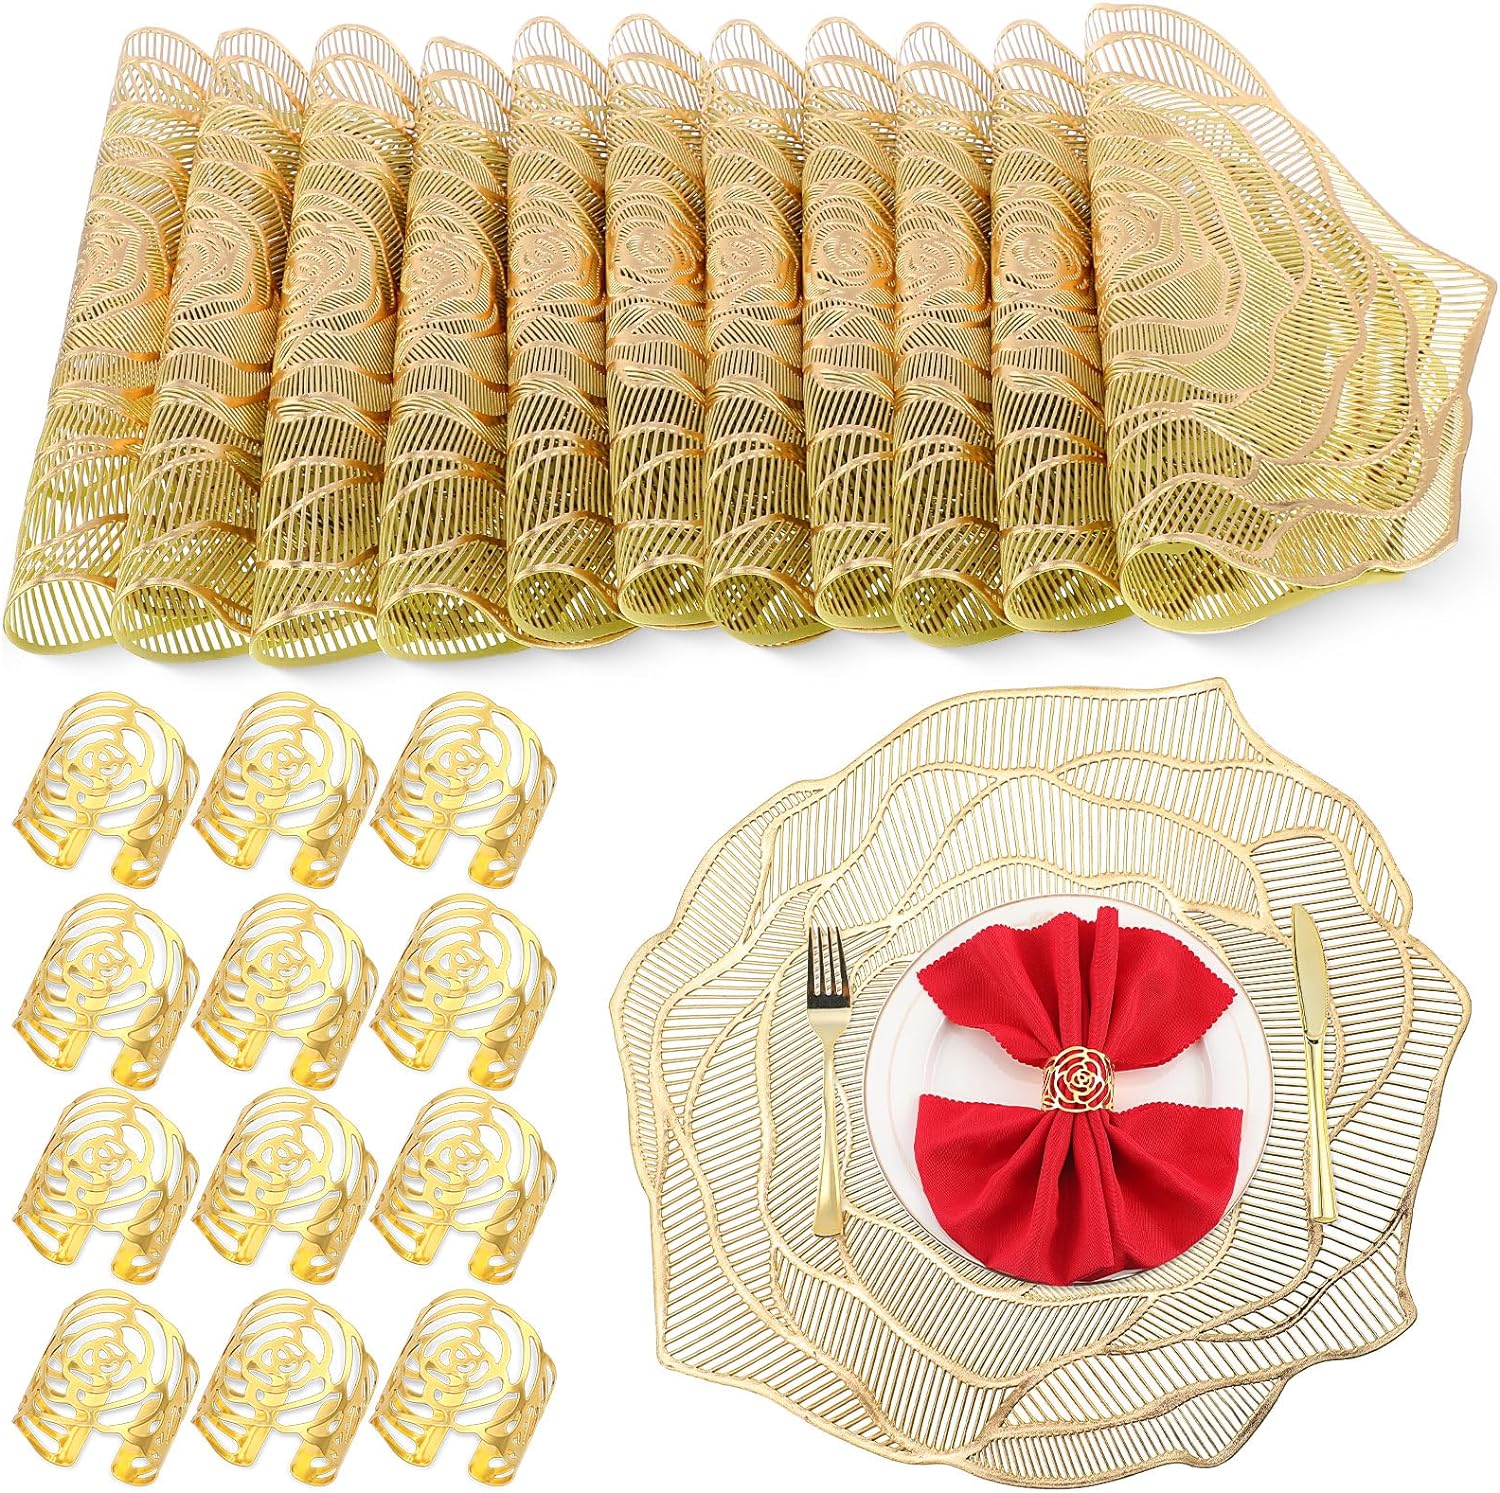 24 Pcs Rose Placemats and Rose Flower Paper Napkin Rings Set, 15 x 15 in Vinyl Round Place Mats Dining Table Mats for Wedding Party Kitchen Table Decoration Home(Gold)